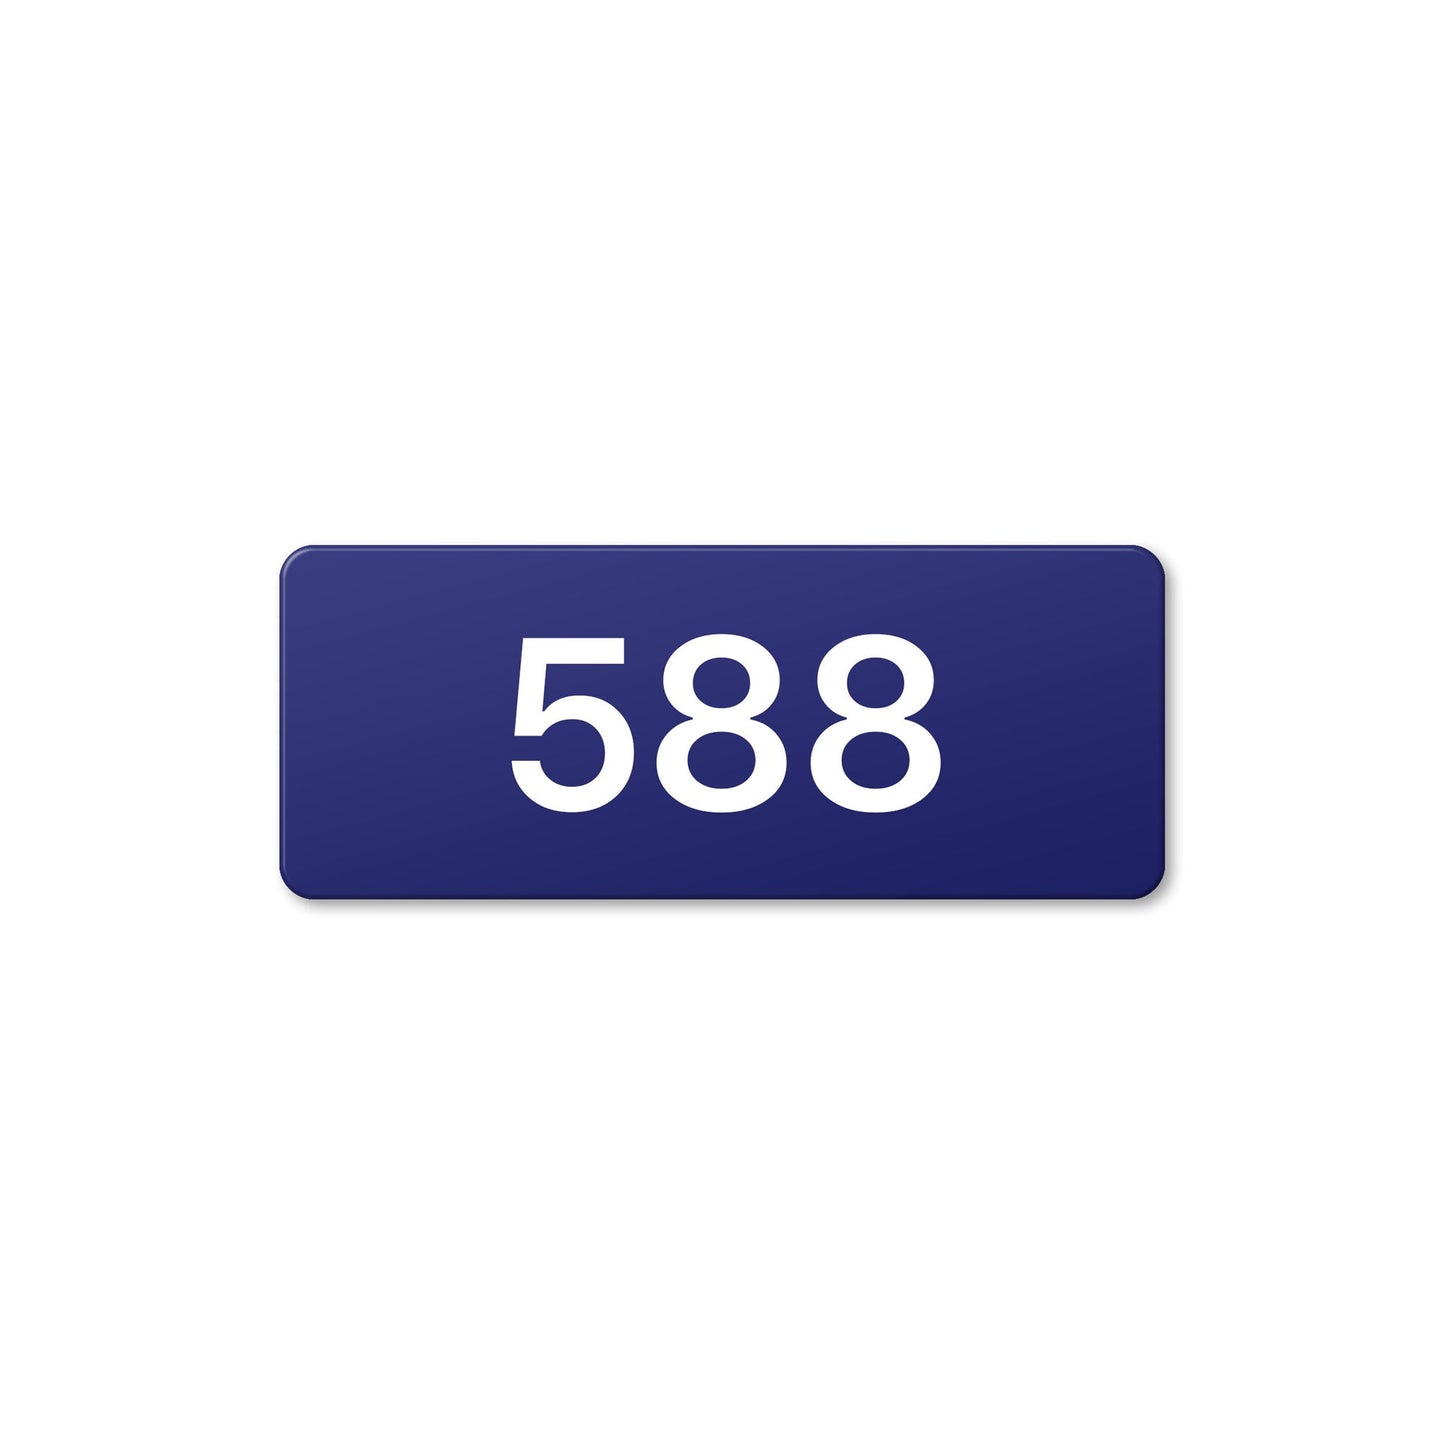 Numeral 588